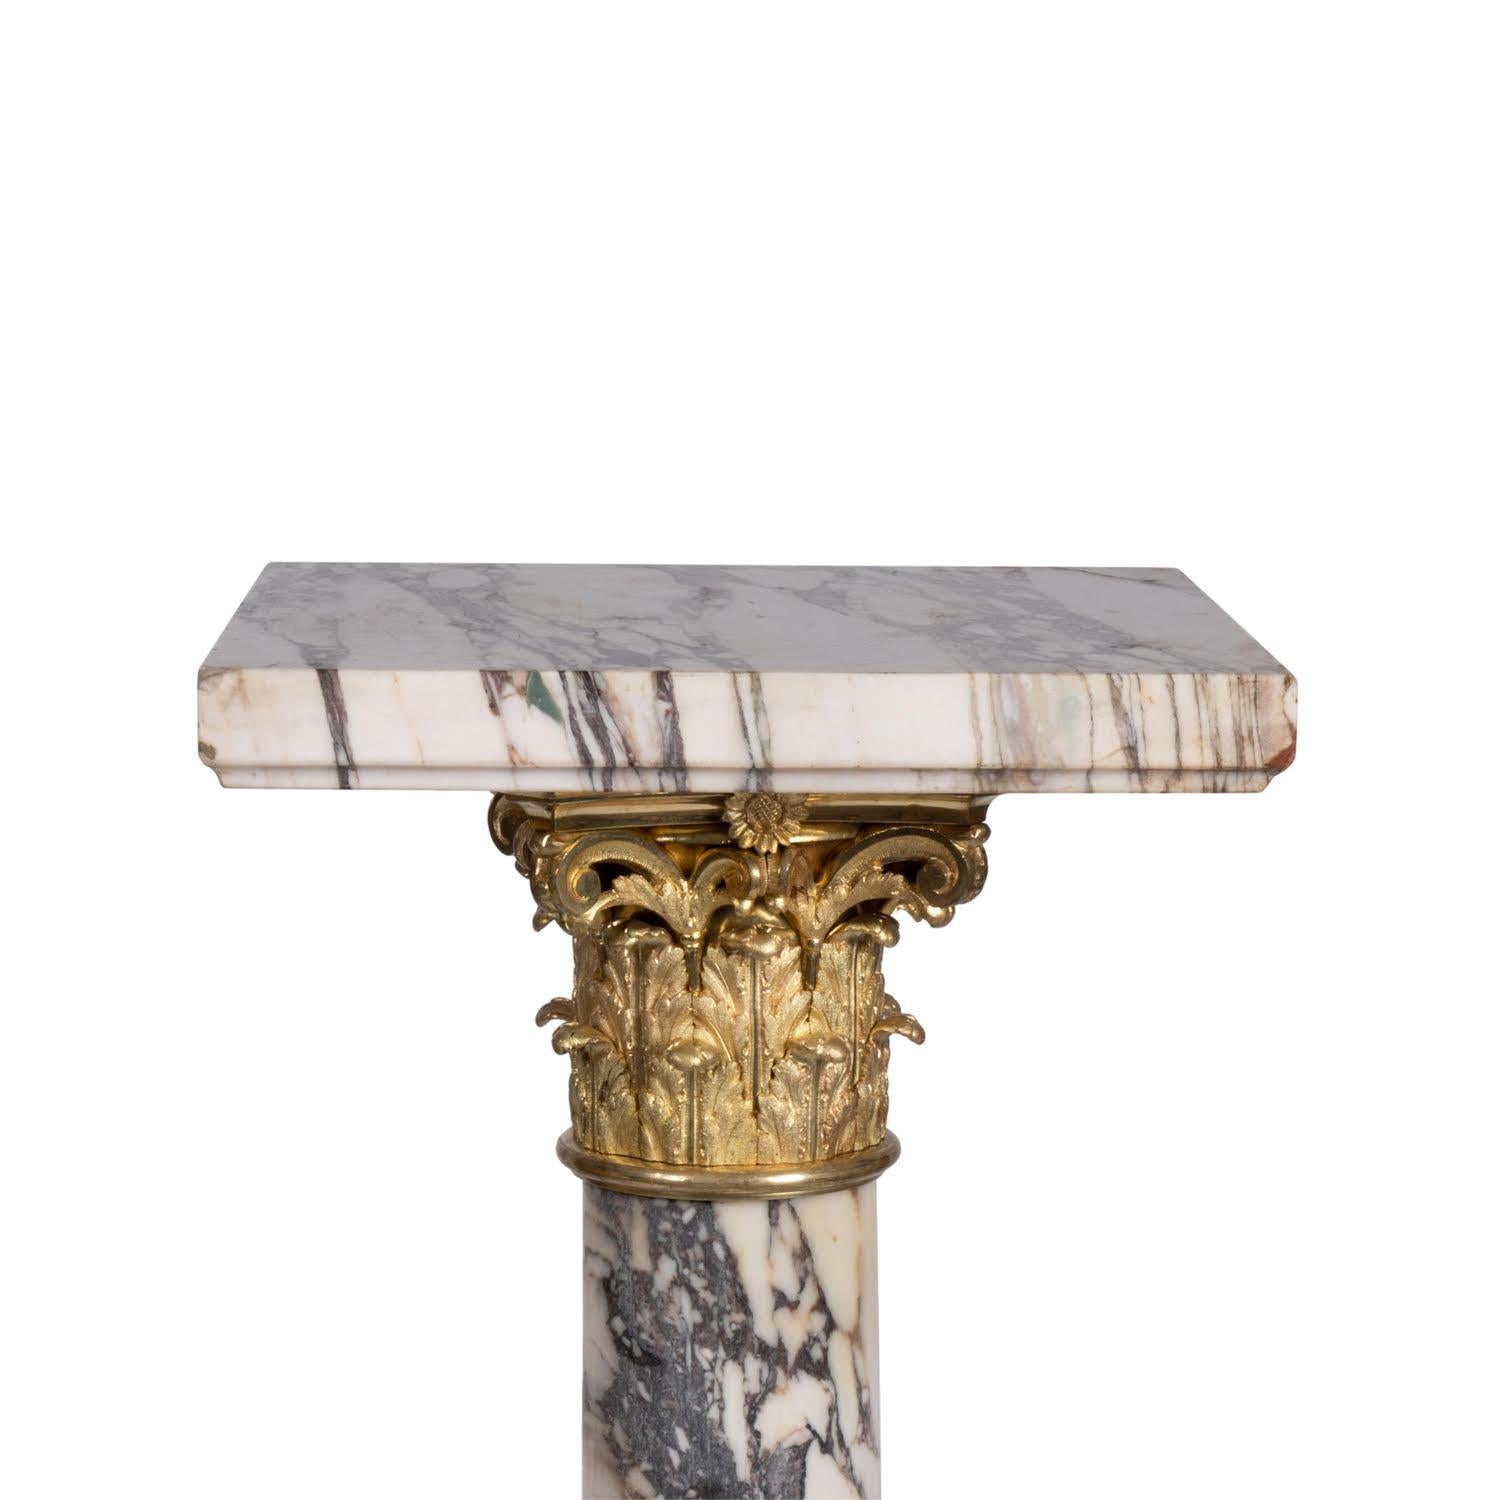 Stele, Column in Marble and Gilt Bronze from the 19th Century.

Marble and gilt bronze column from the Napoleon III period, 19th century.  
H: 120cm, W: 35cm, D: 35cm